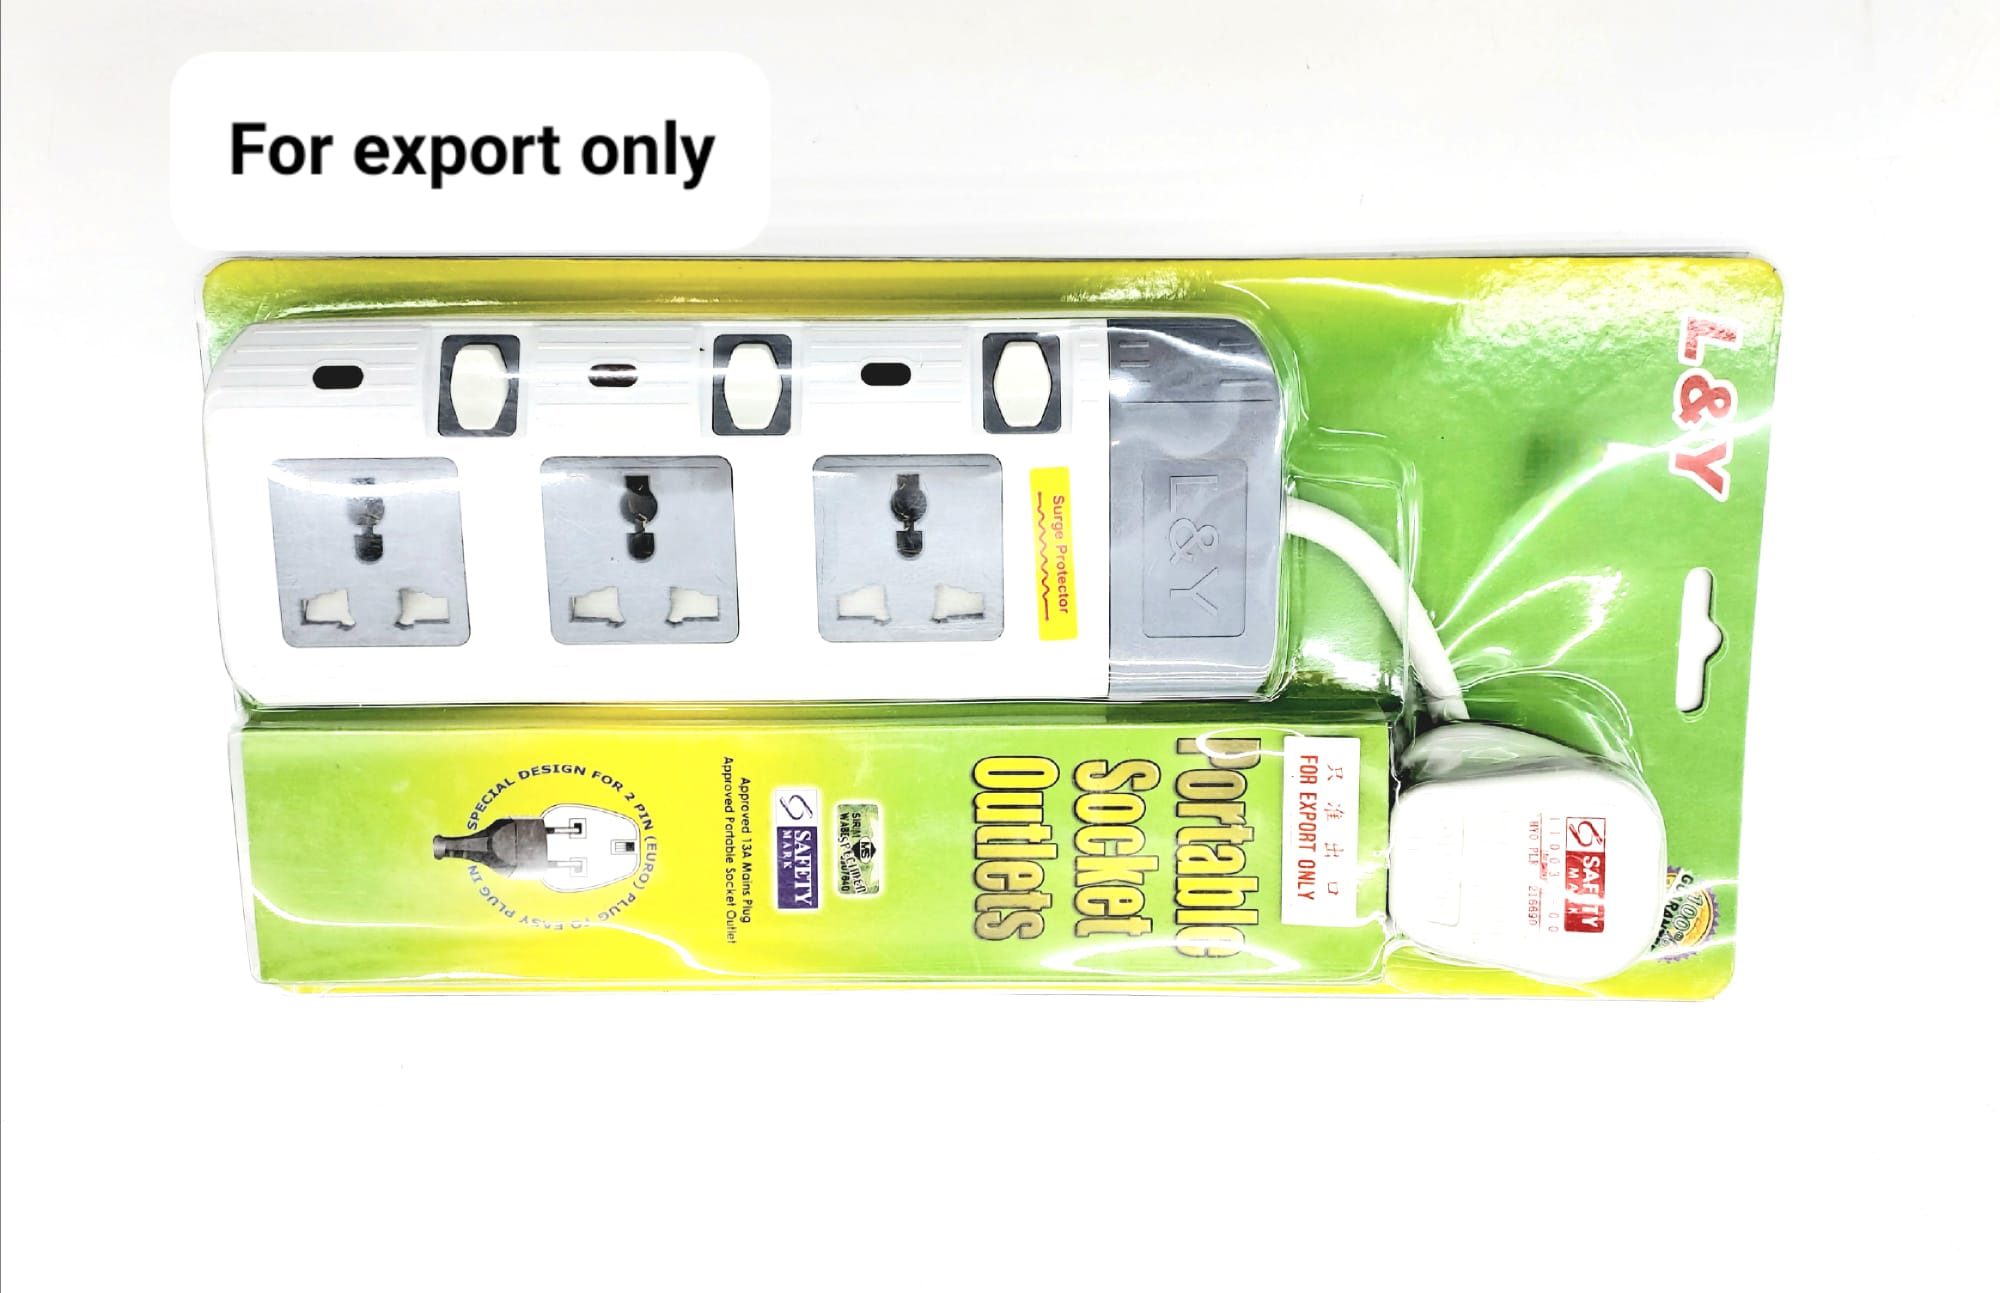 8123-3M L&Y 3 Way 3pin Multi Socket Outlet (for export only) 